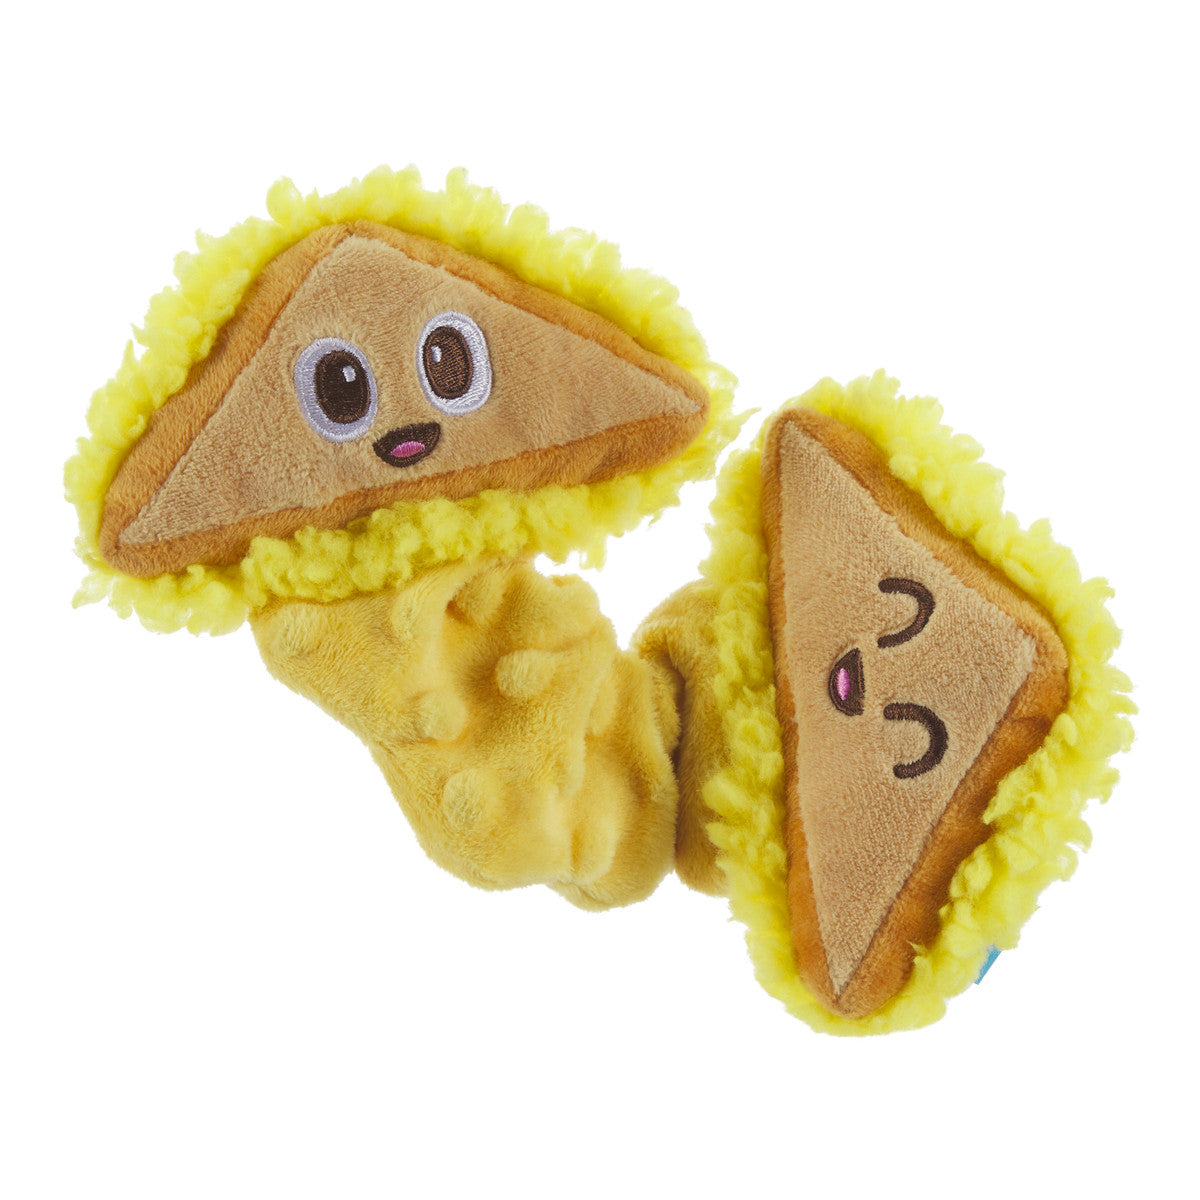 BARK Squeeze Cheese Sandwich Toy